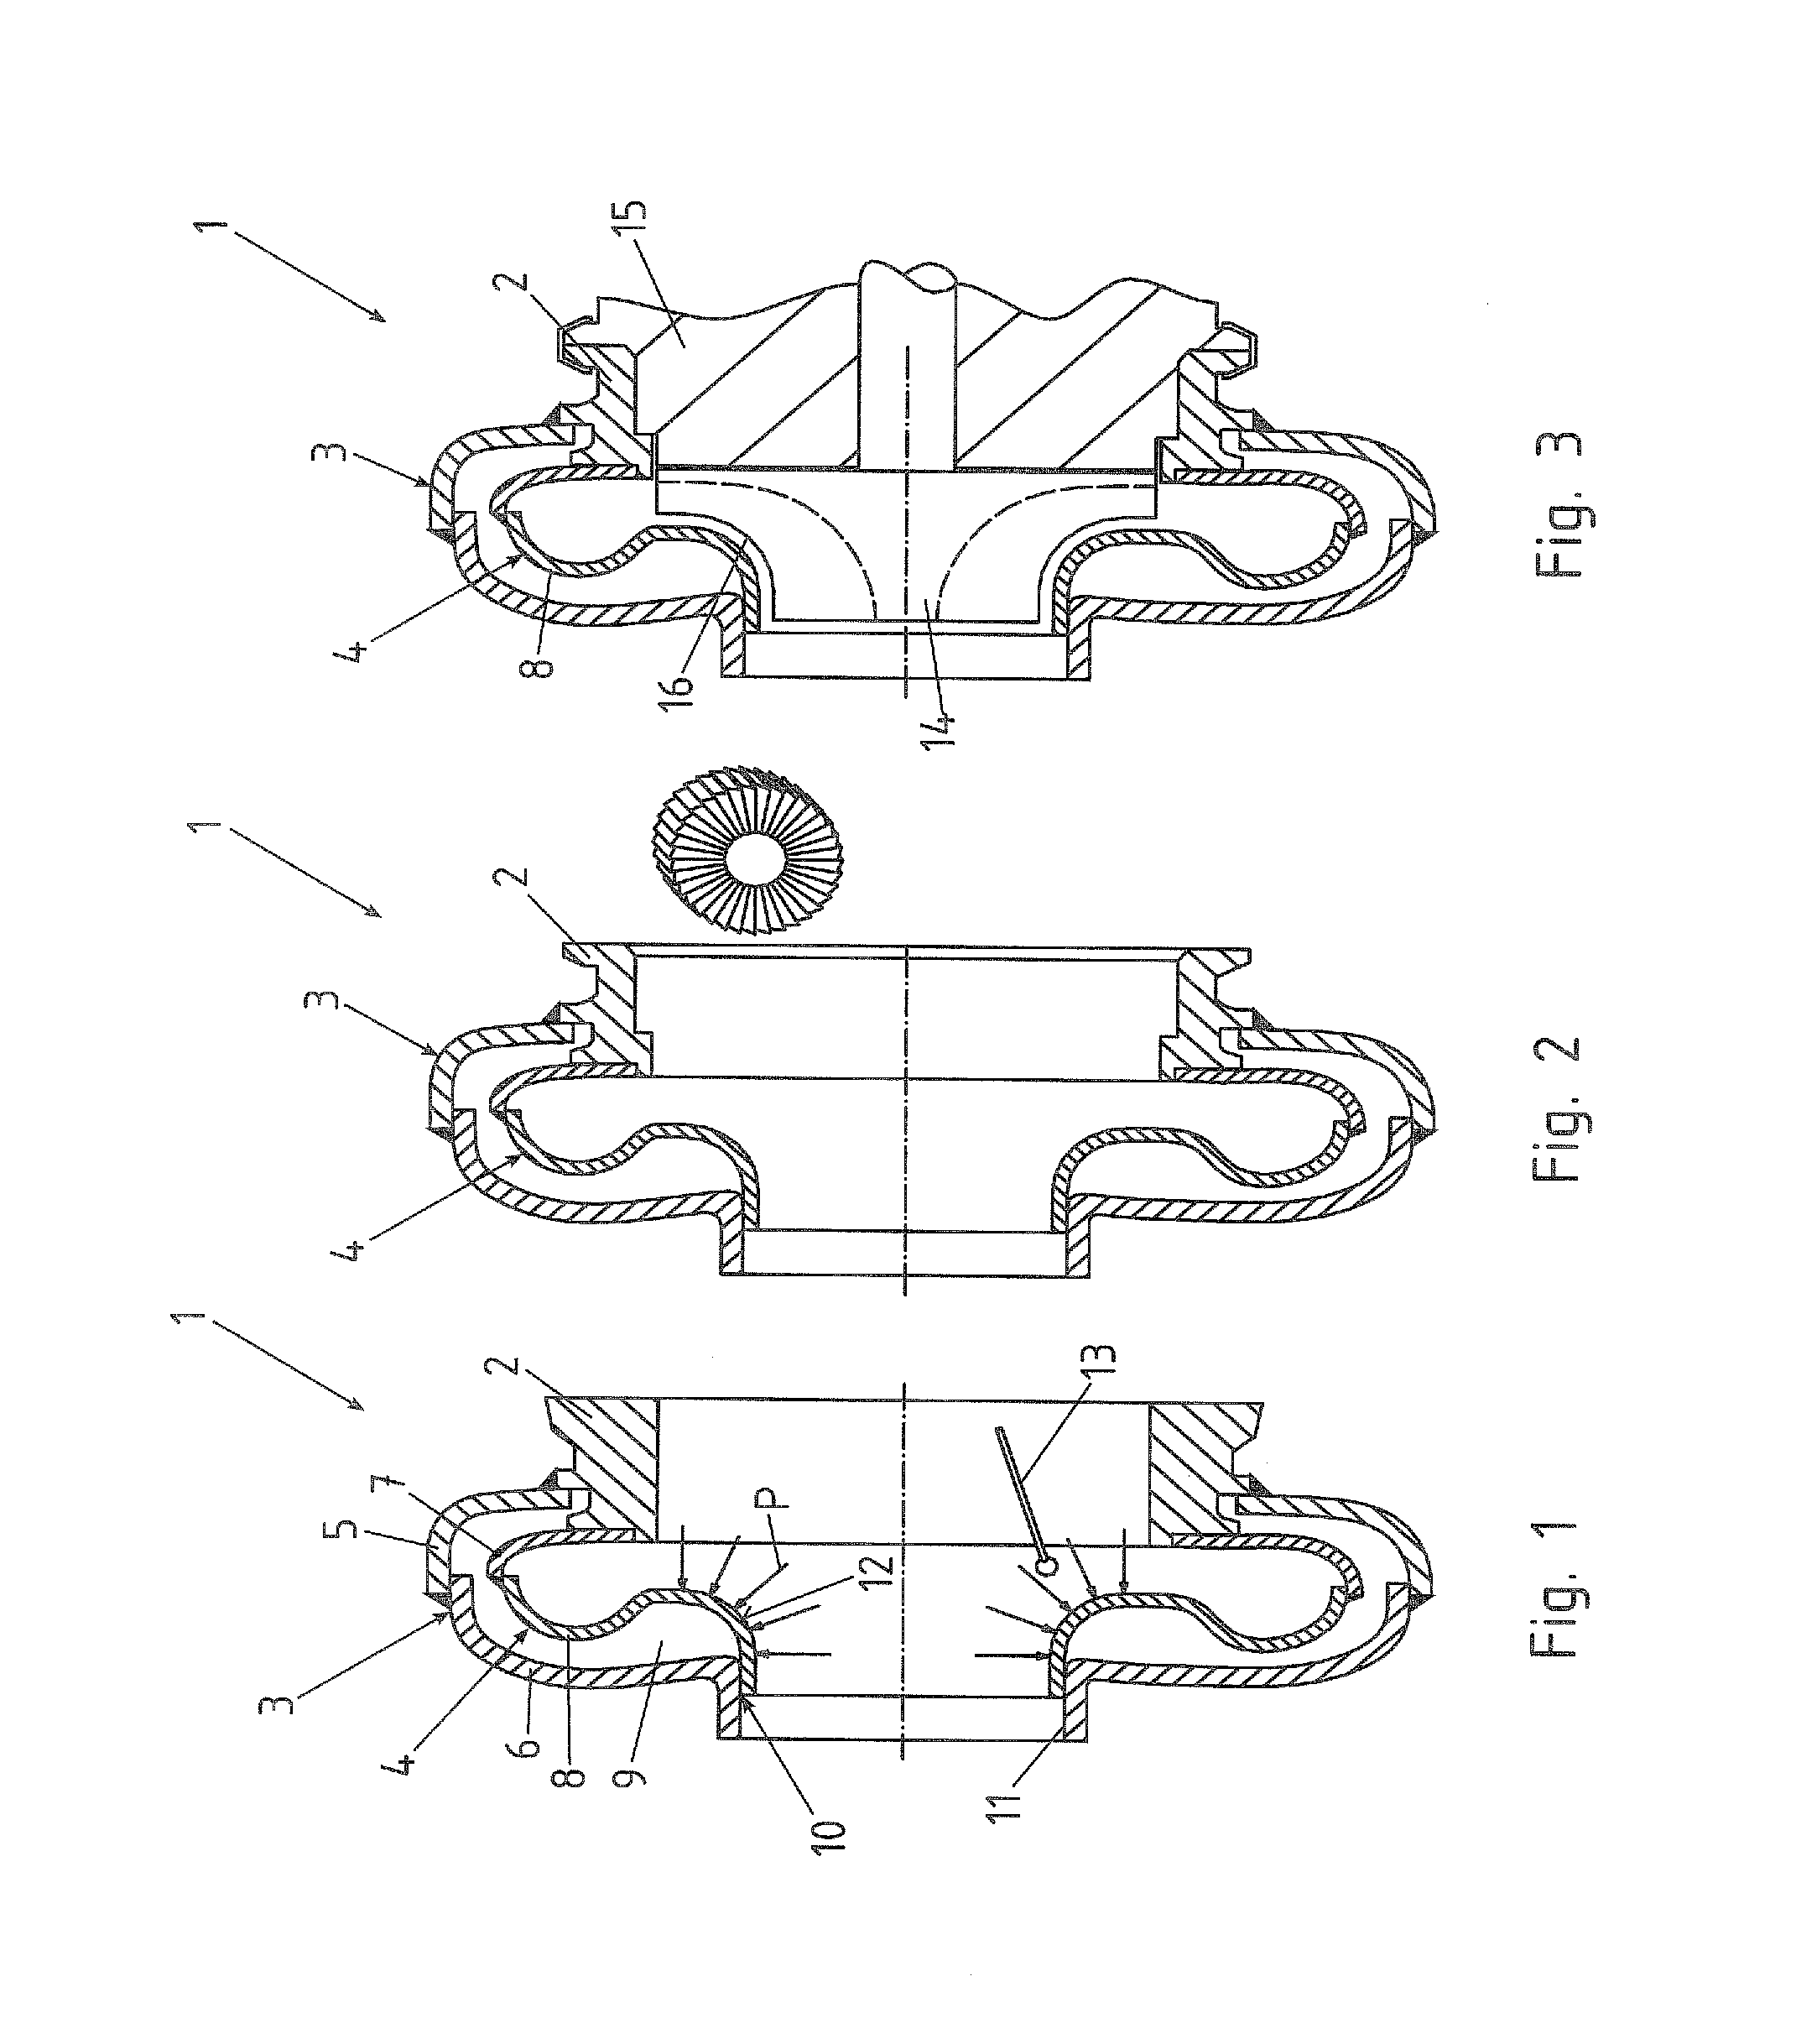 Method of making a turbocharger housing